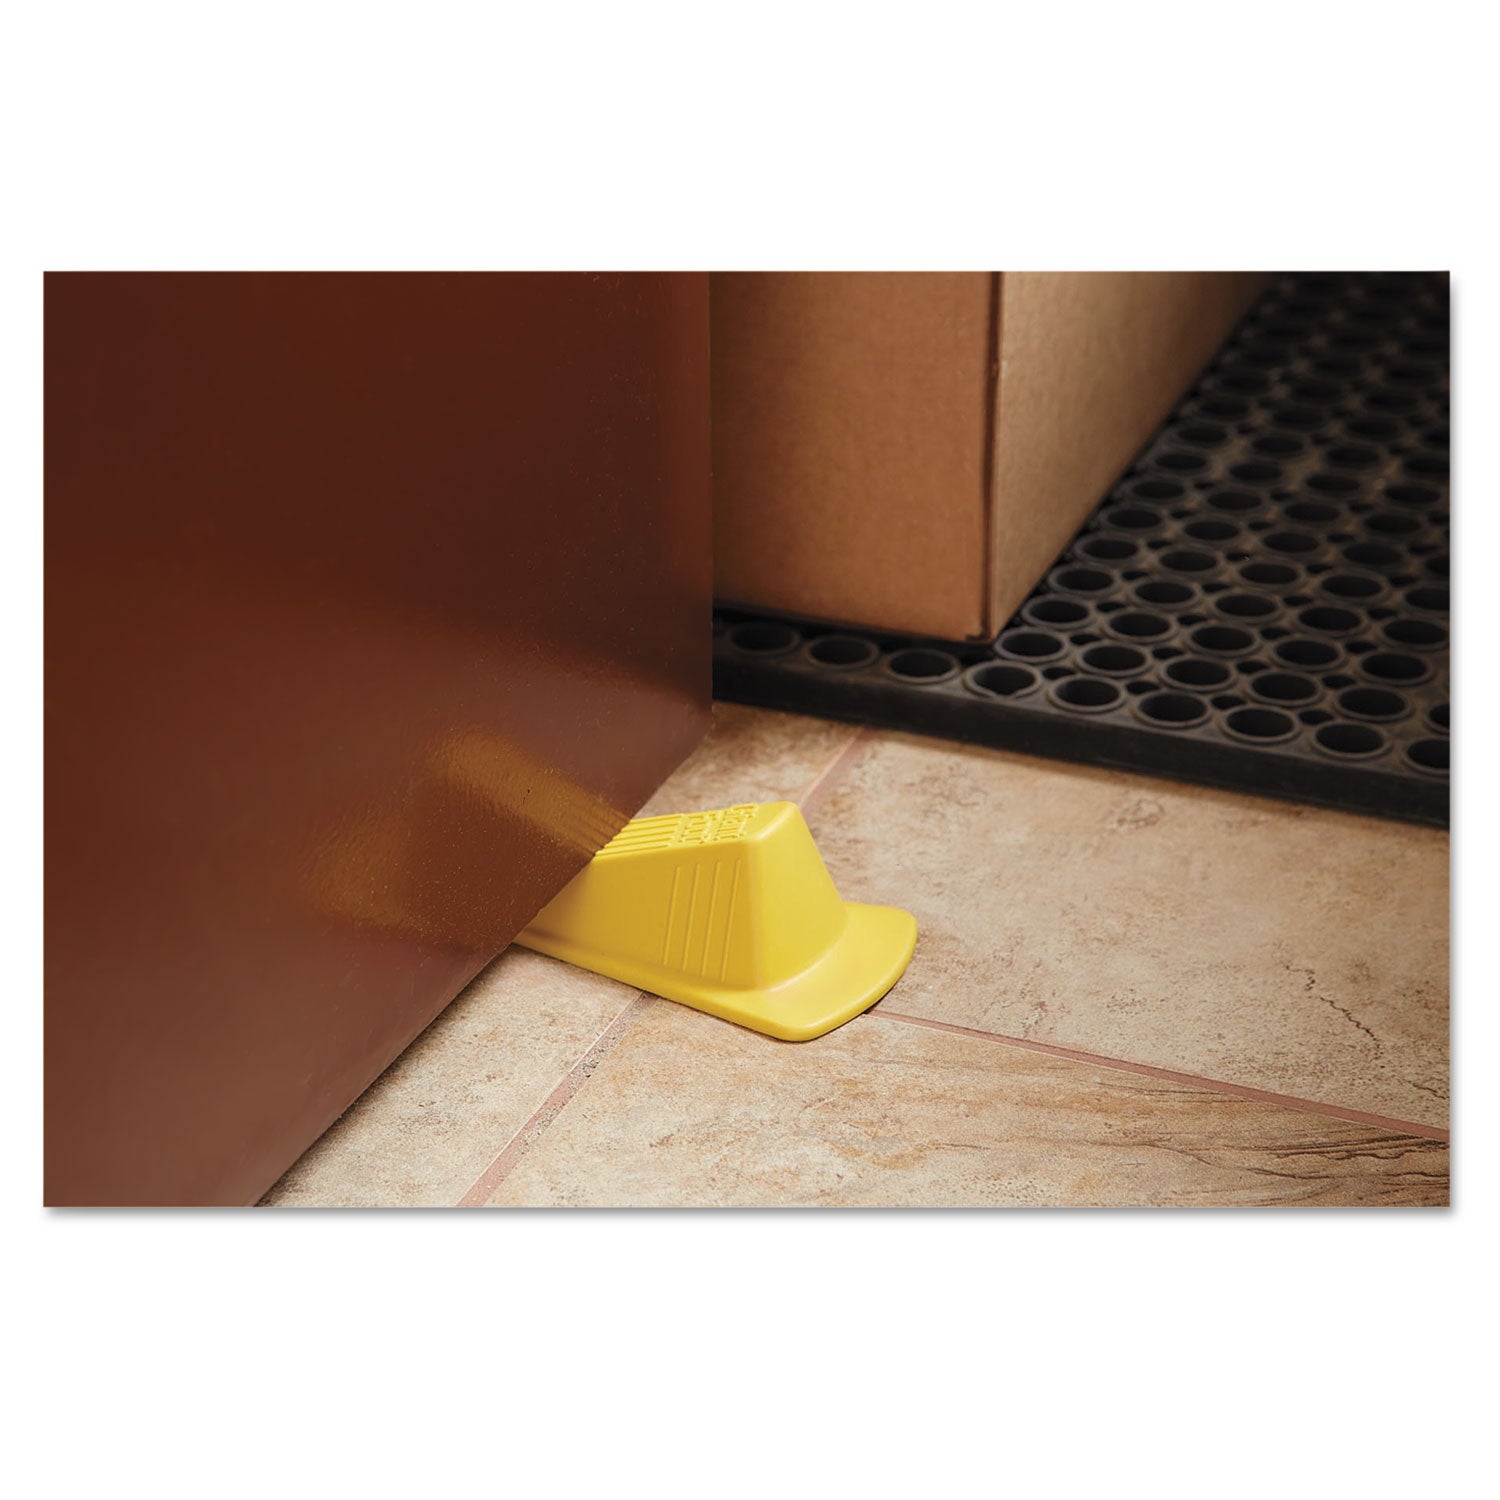 Giant Foot Doorstop, No-Slip Rubber Wedge, 3.5w x 6.75d x 2h, Safety Yellow - 